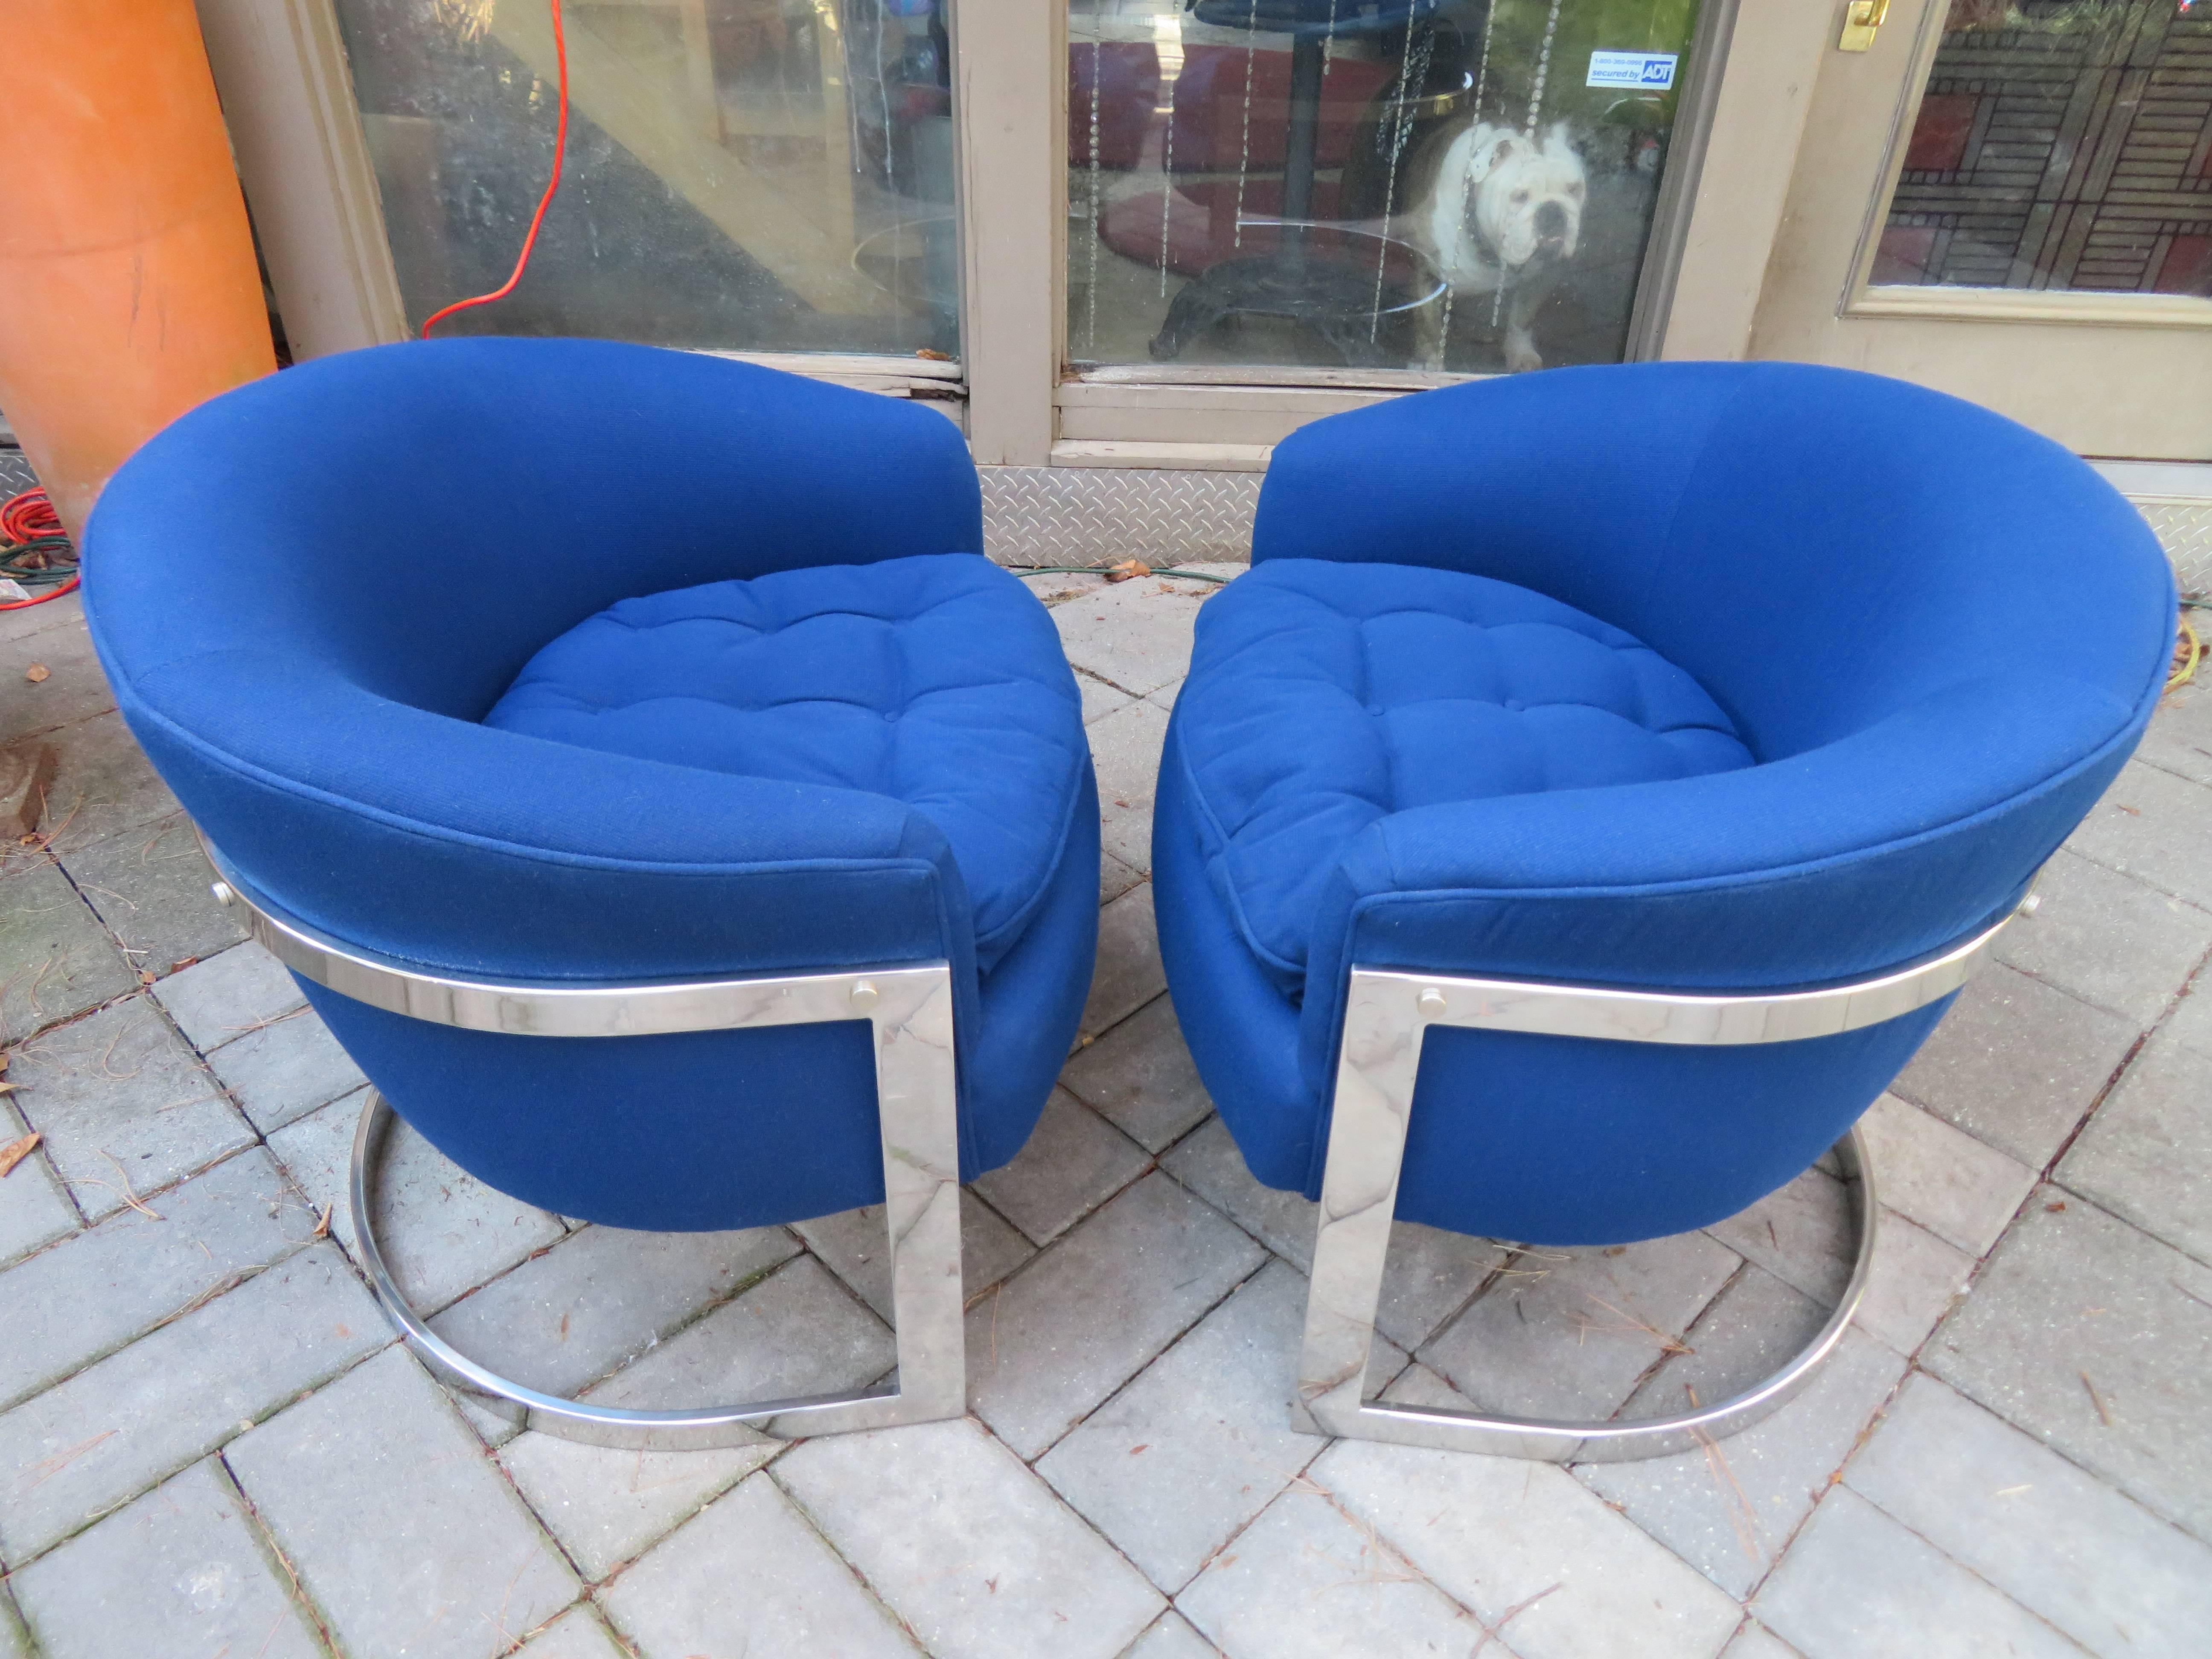 Fabulous pair of chrome cantilevered barrel back chairs. This pair is super clean and have shiny mirrored finish chrome and original upholstery in nice vintage condition. The seat is slightly wider than most like this-just fabulous!